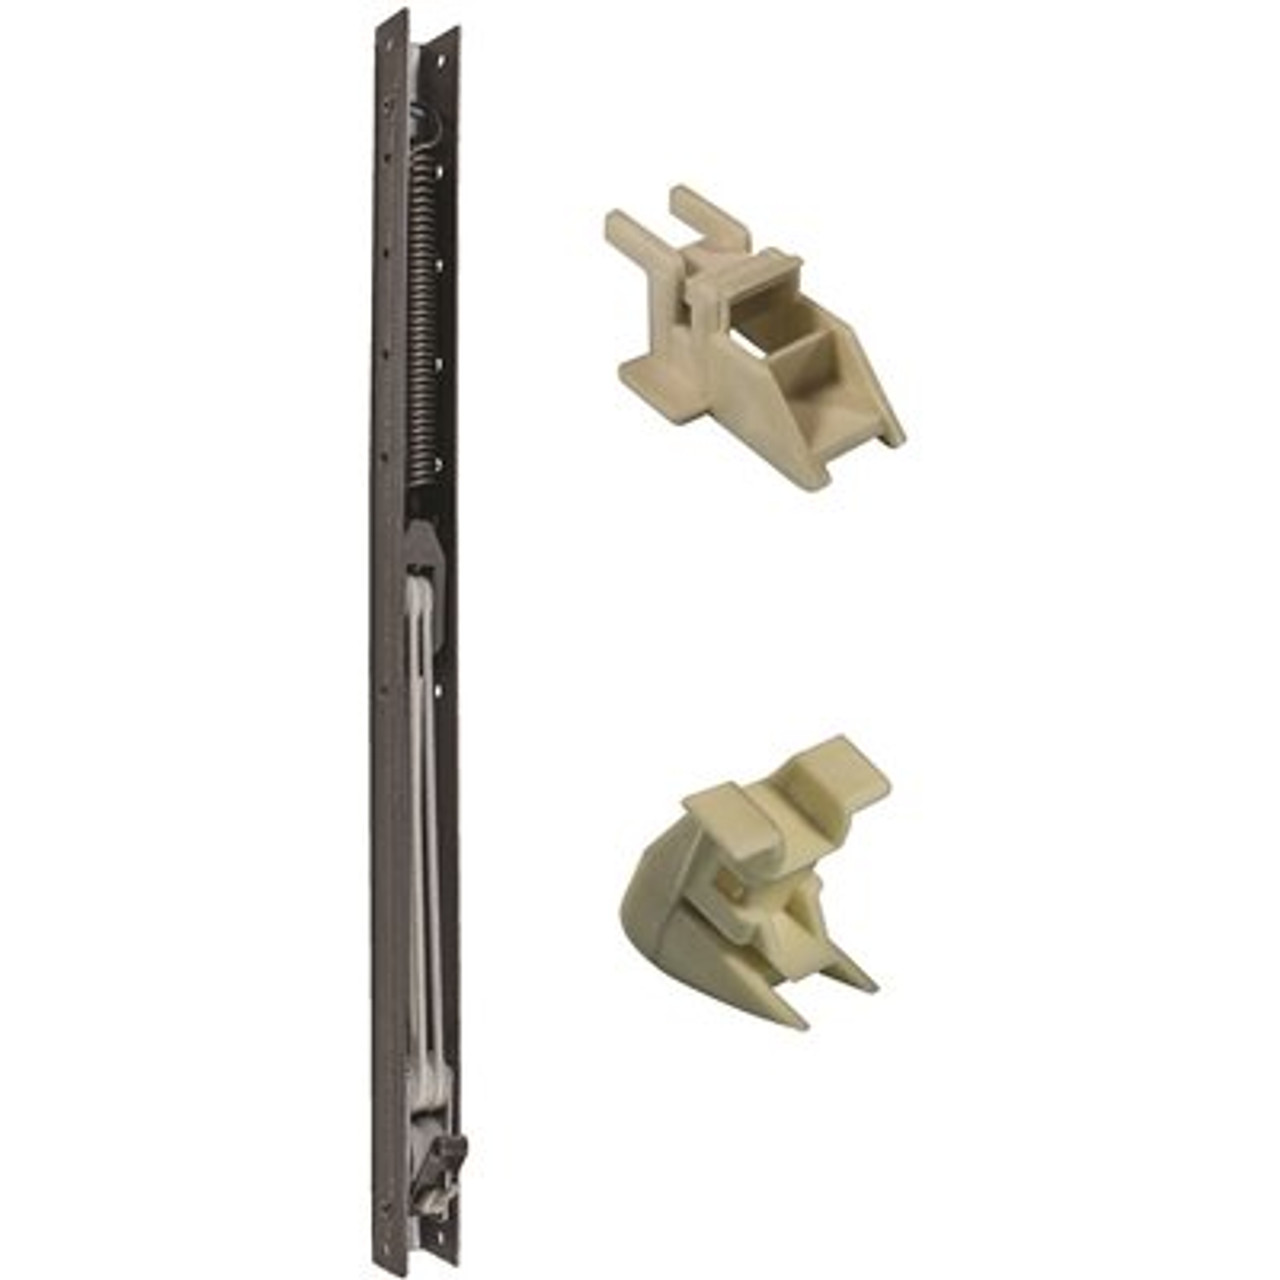 23 In. L Window Channel Balance 2240 With 9/16 In. W X 5/8 In. D Top And Bottom End Brackets Attached - 314413437